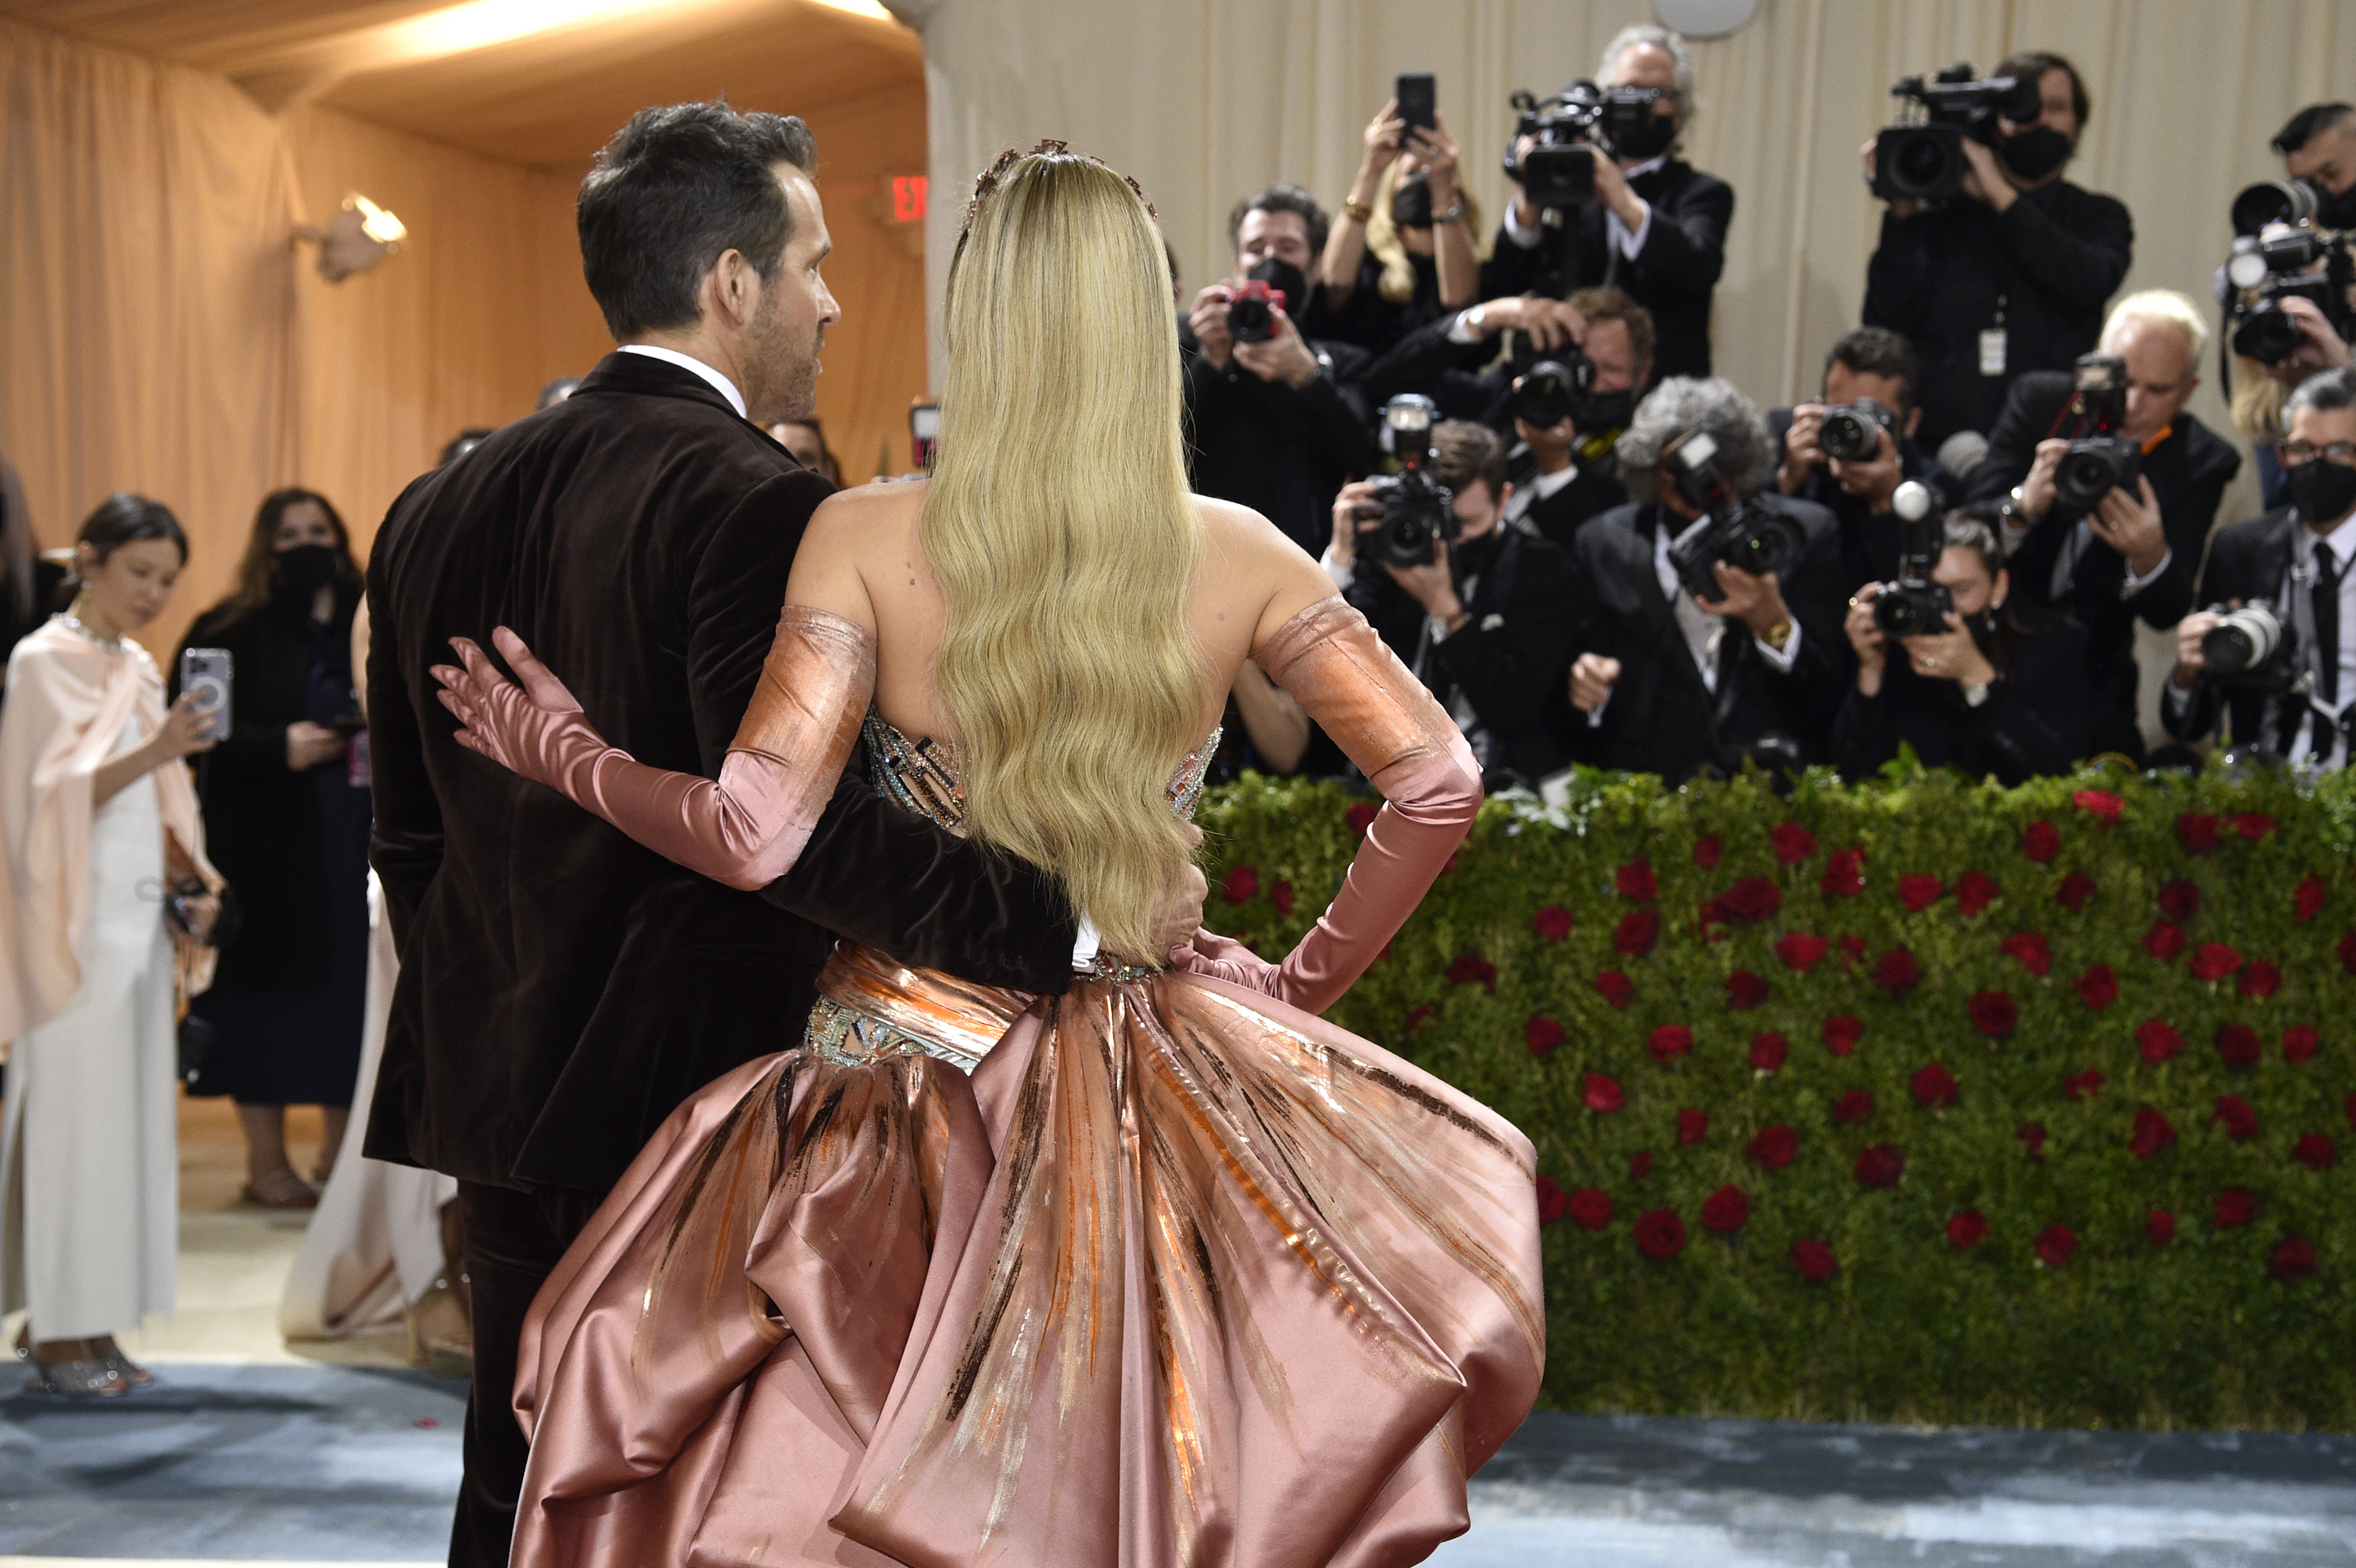 Met Gala 2023: Celebrities Who Nailed the Karl Lagerfeld Theme